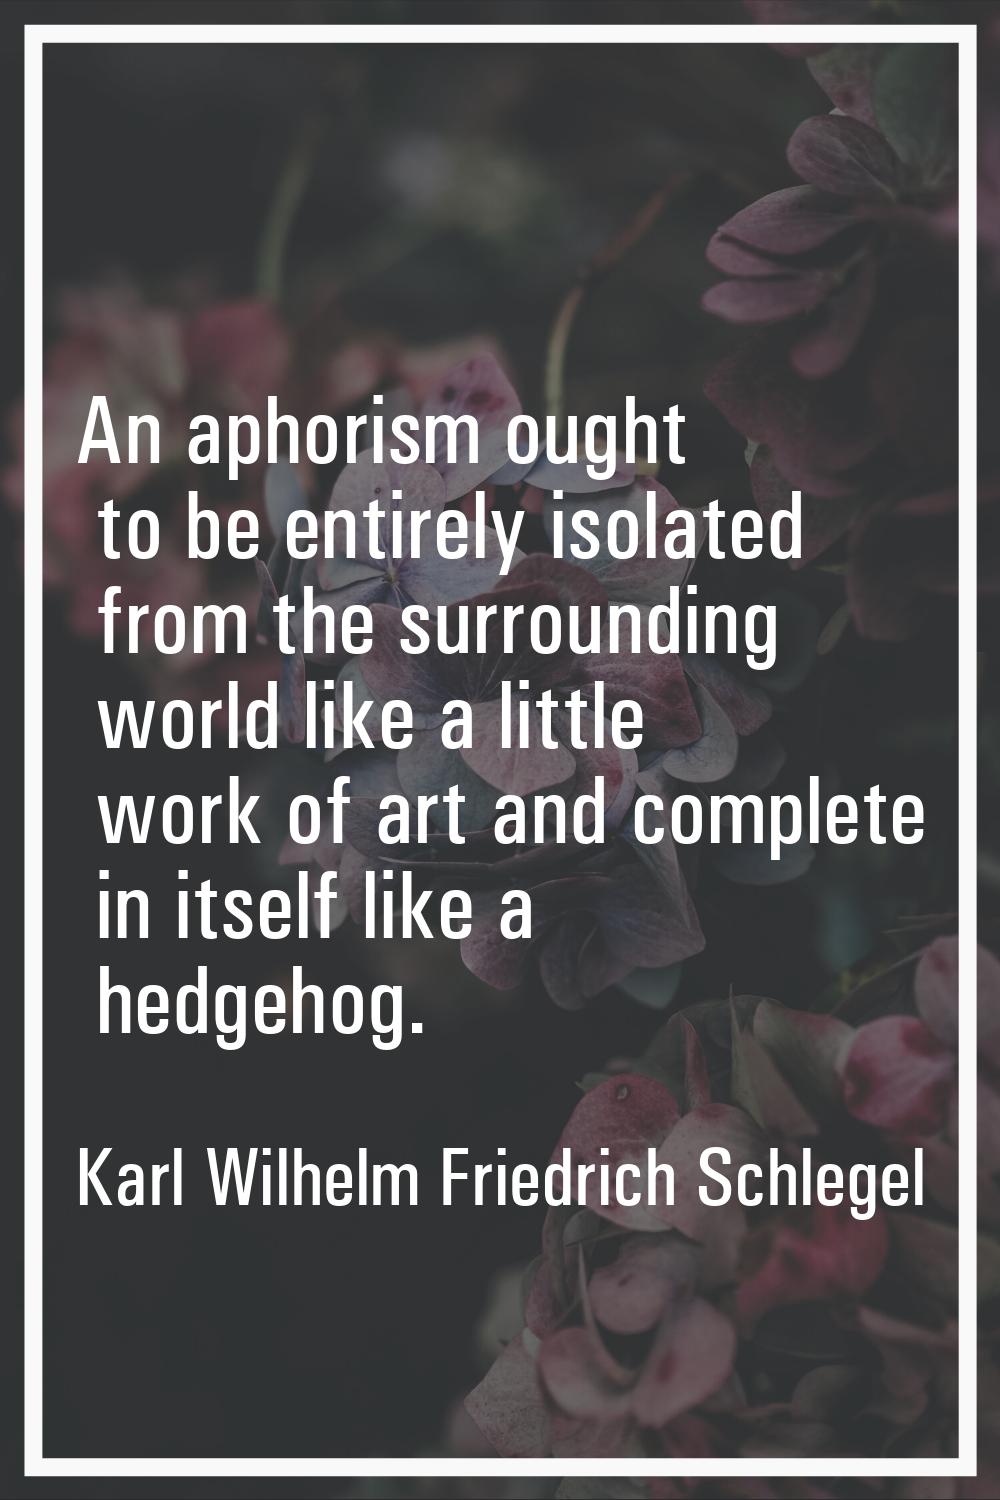 An aphorism ought to be entirely isolated from the surrounding world like a little work of art and 